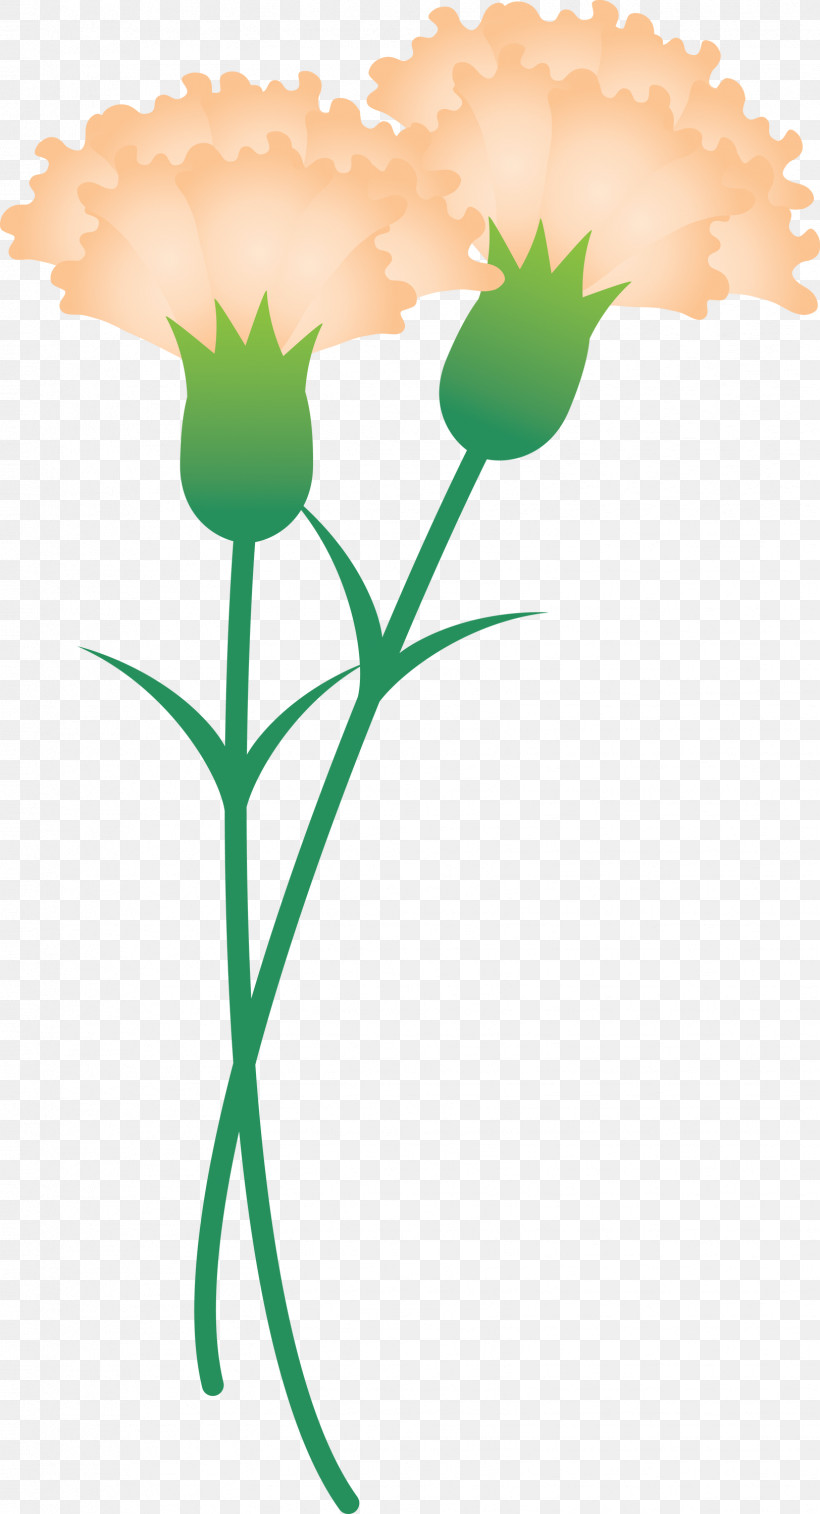 Mothers Day Carnation Mothers Day Flower, PNG, 1624x3000px, Mothers Day Carnation, Cut Flowers, Flower, Mothers Day Flower, Pedicel Download Free